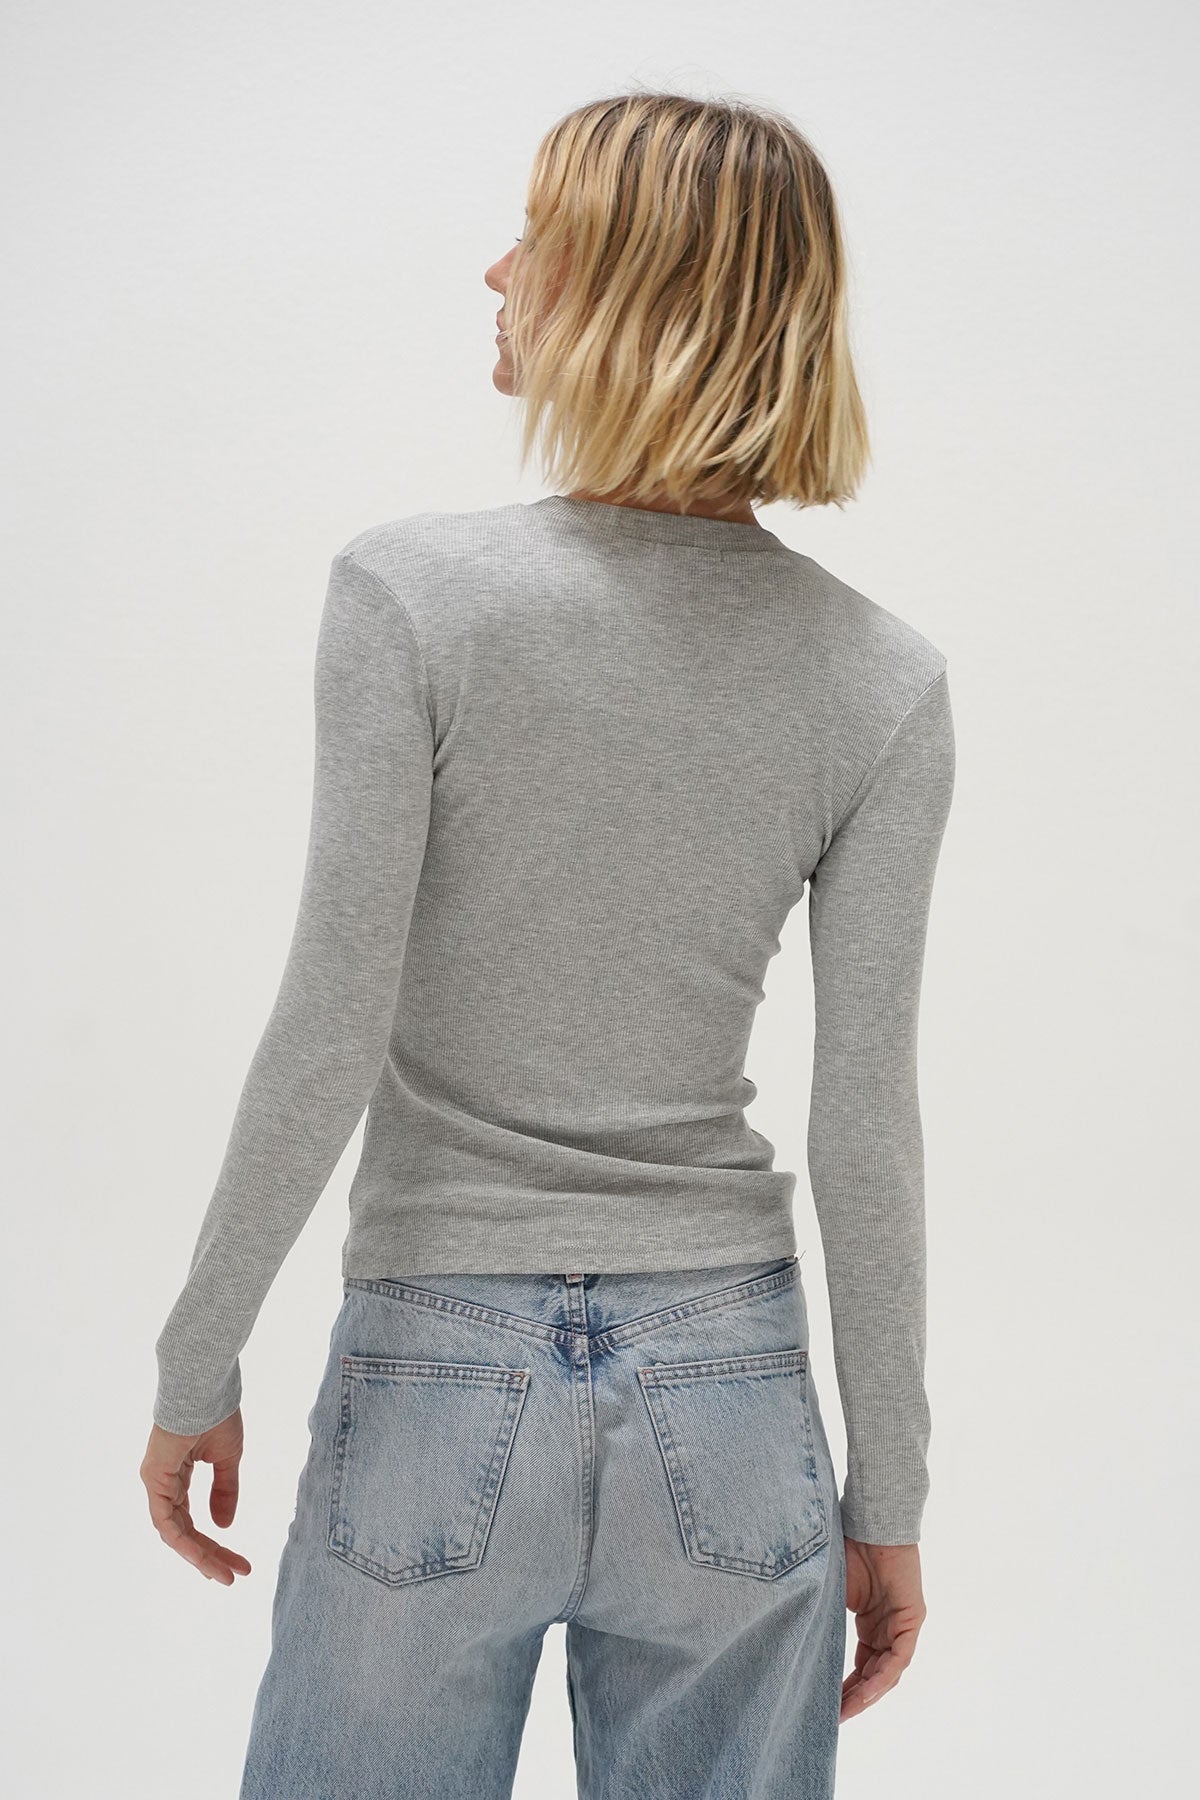 LNA Dalston Ribbed Long Sleeve in Heather Grey